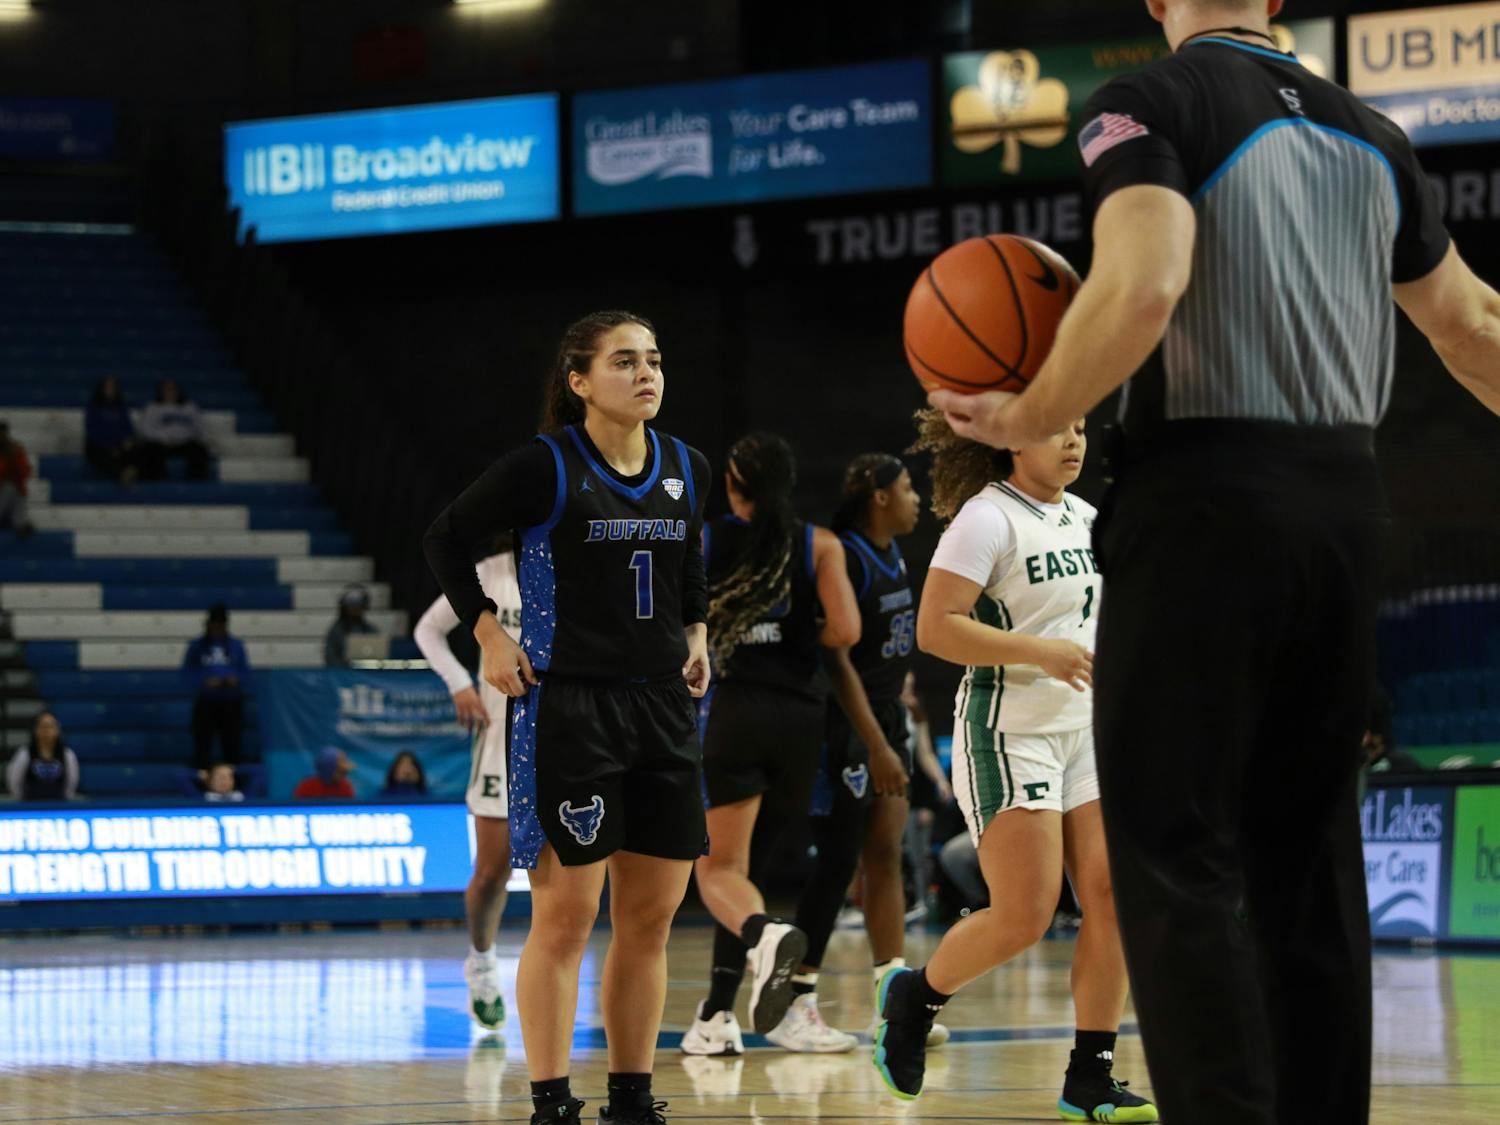 Senior guard Rana Elhusseini stole the show with a triple-double of 11 points, 12 assists and 10 rebounds, the third ever in program history. &nbsp;